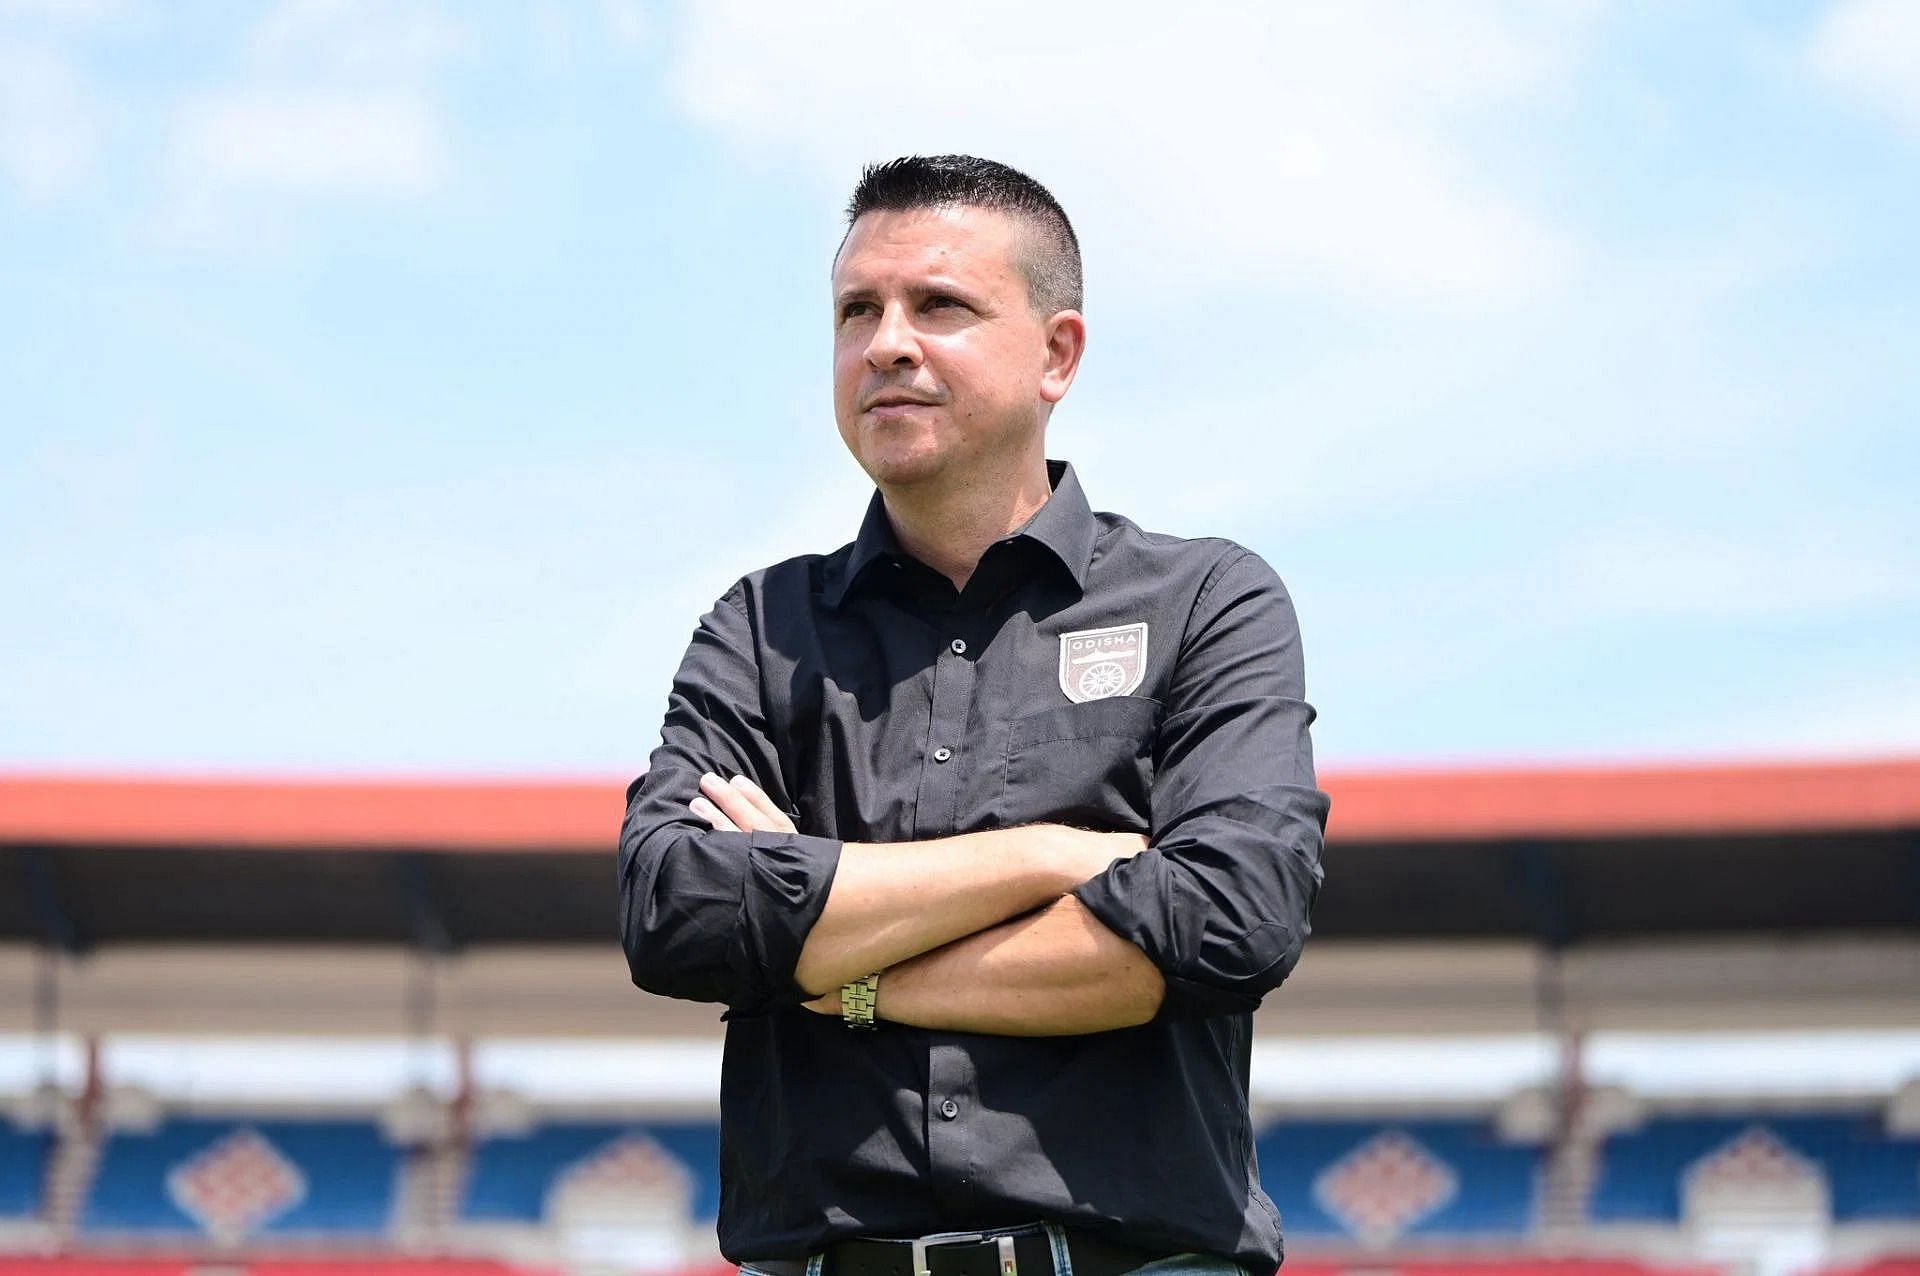 Odisha FC head coach Sergio Lobera has expressed his excitement over the development of the Indian players in the ISL and the league as a whole becoming more competitive with each passing year